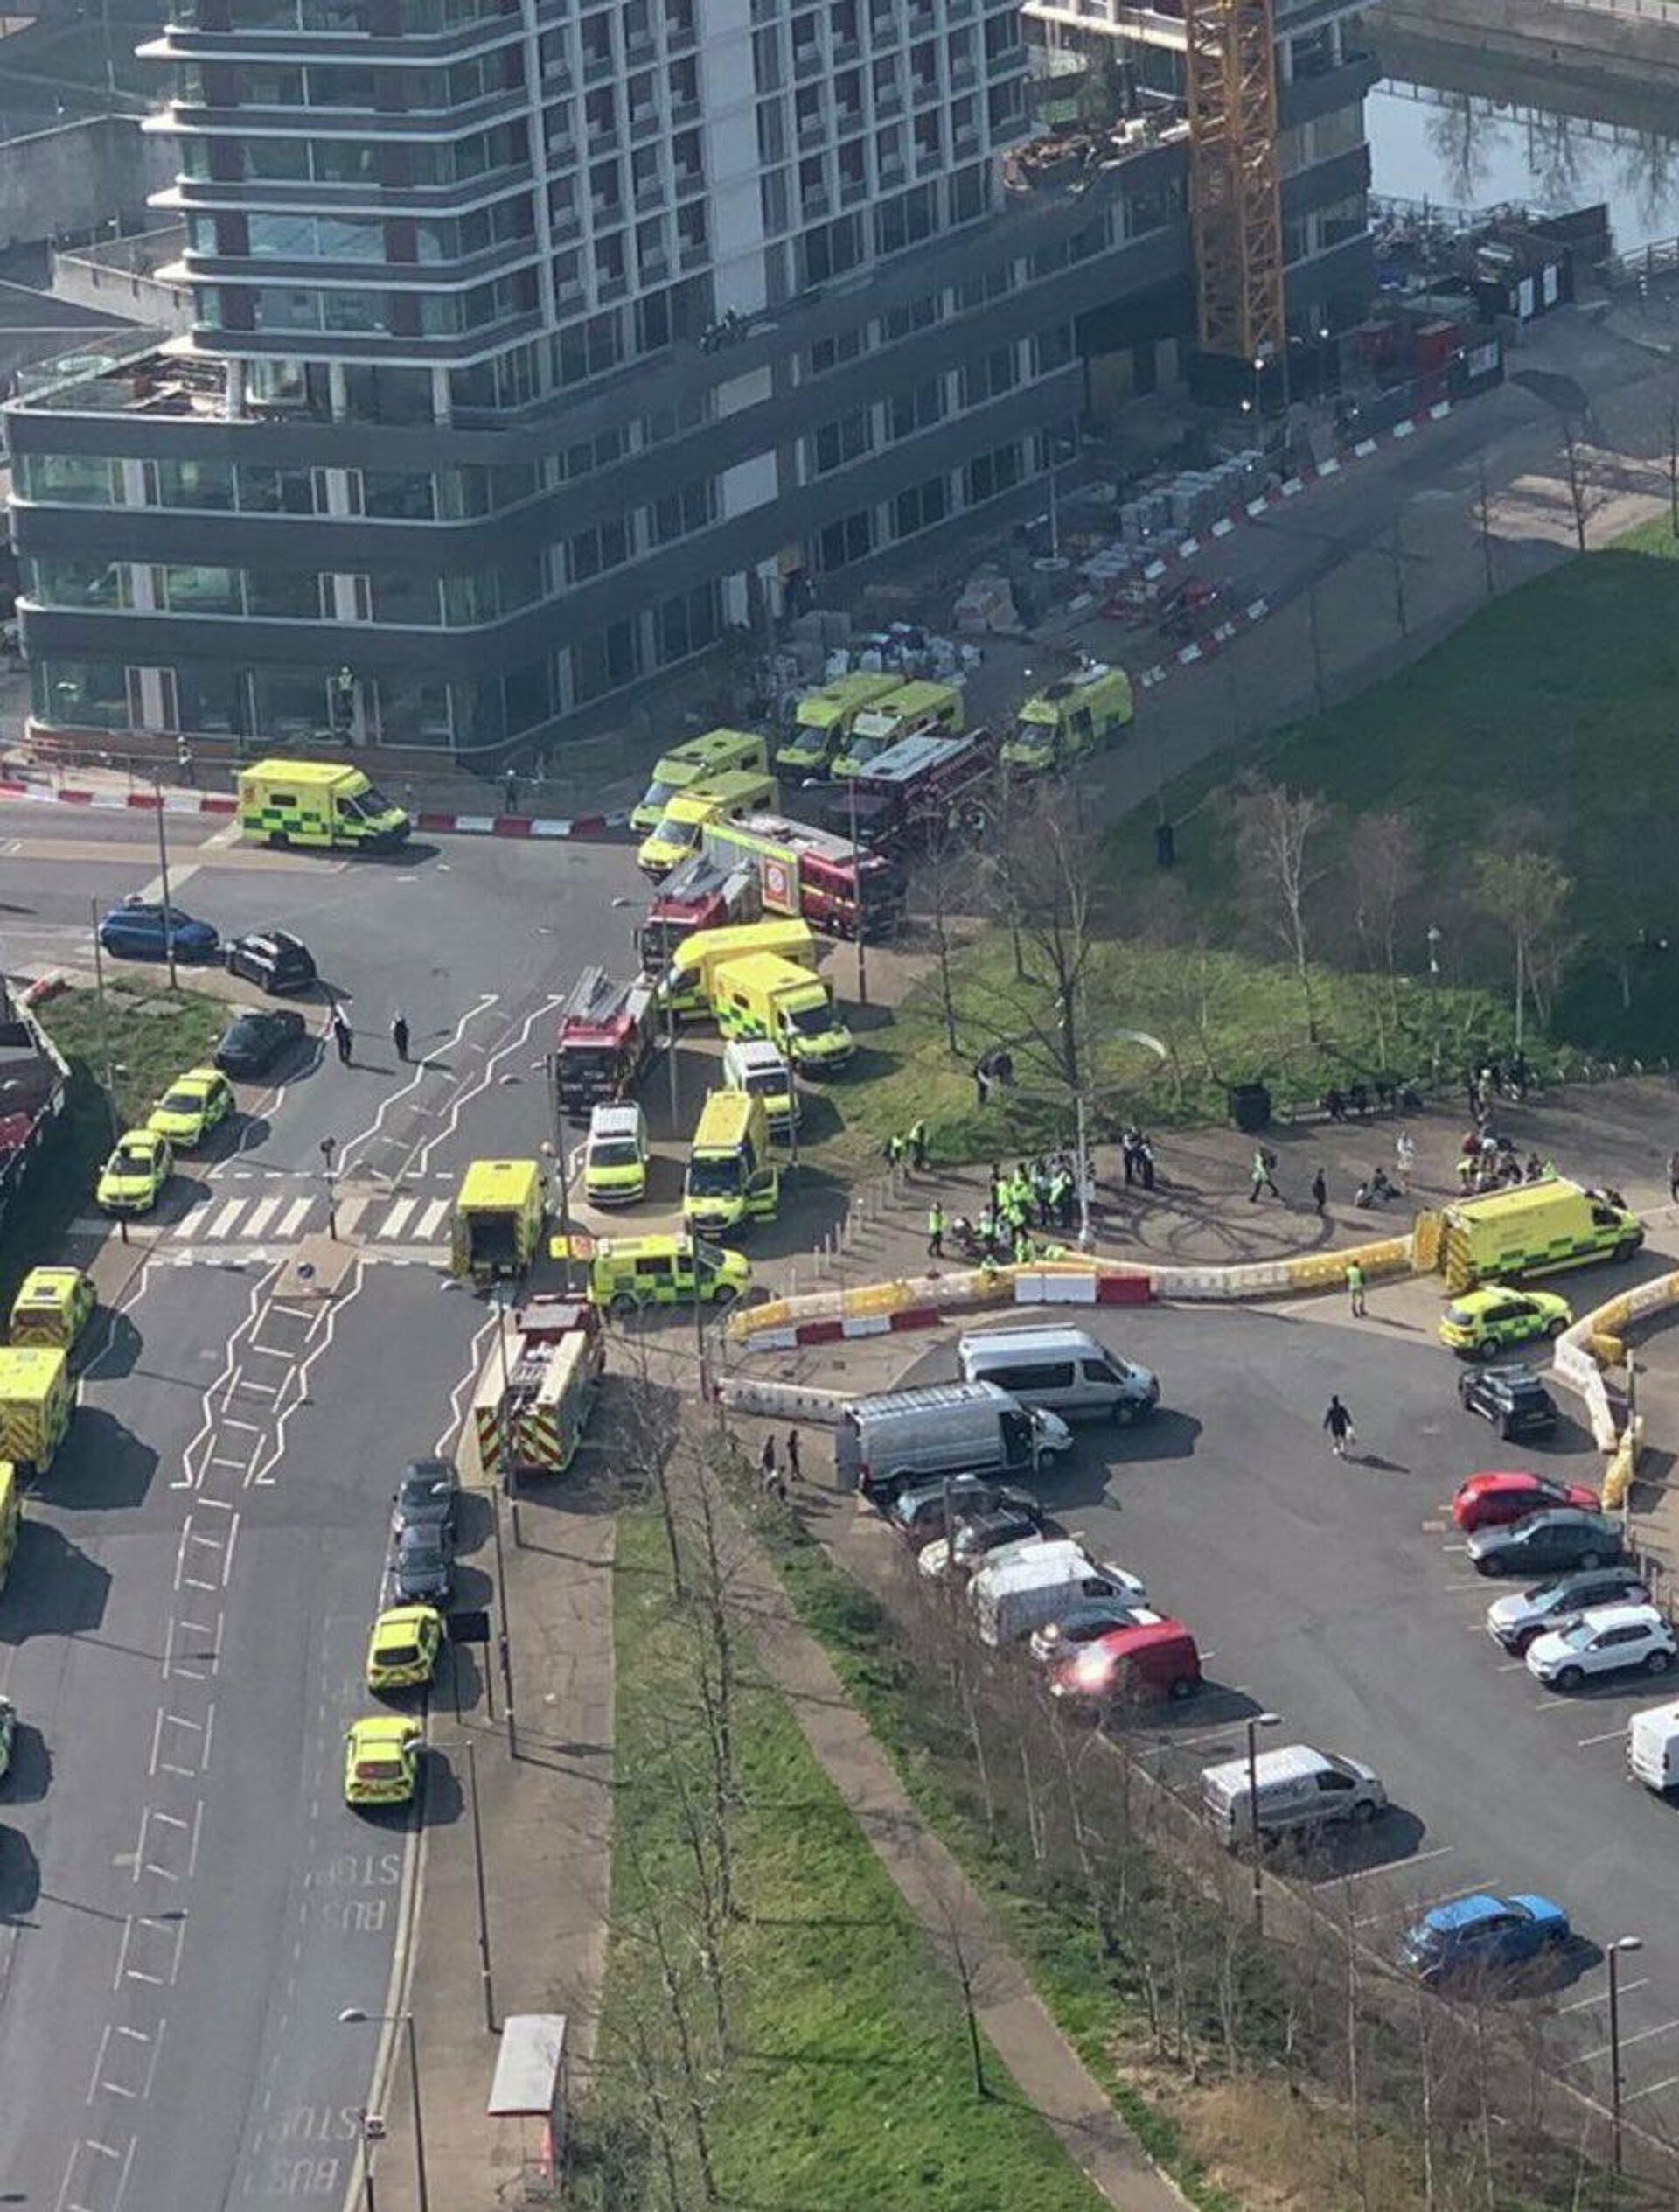 Ambulance crews are responding to reports of a gas leak at the Queen Elizabeth Olympic Park Aquatics Centre in east London - Sputnik International, 1920, 23.03.2022